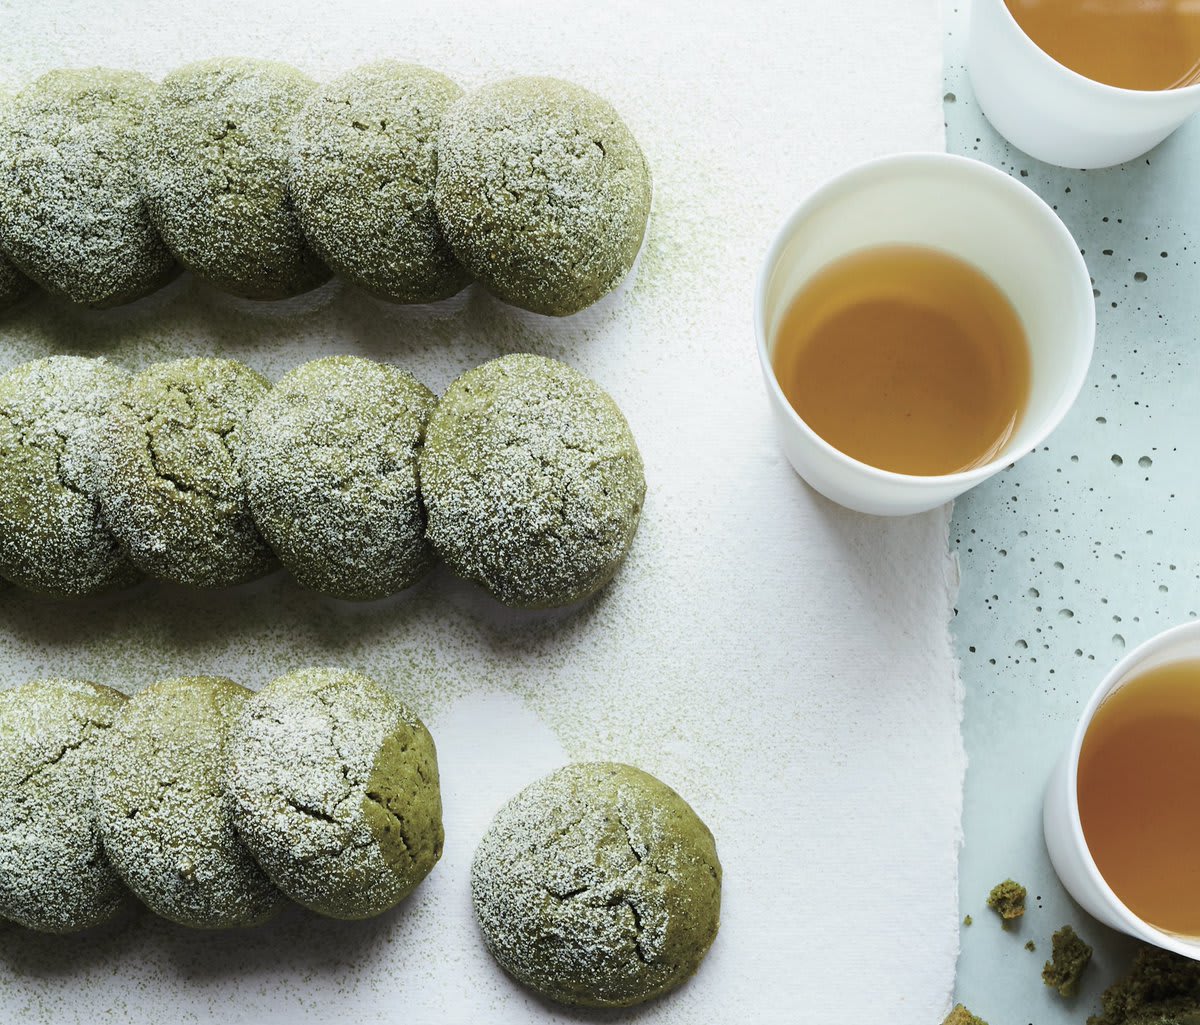 Soft and subtly sweet, these matcha tea cake cookies are a treat for any season